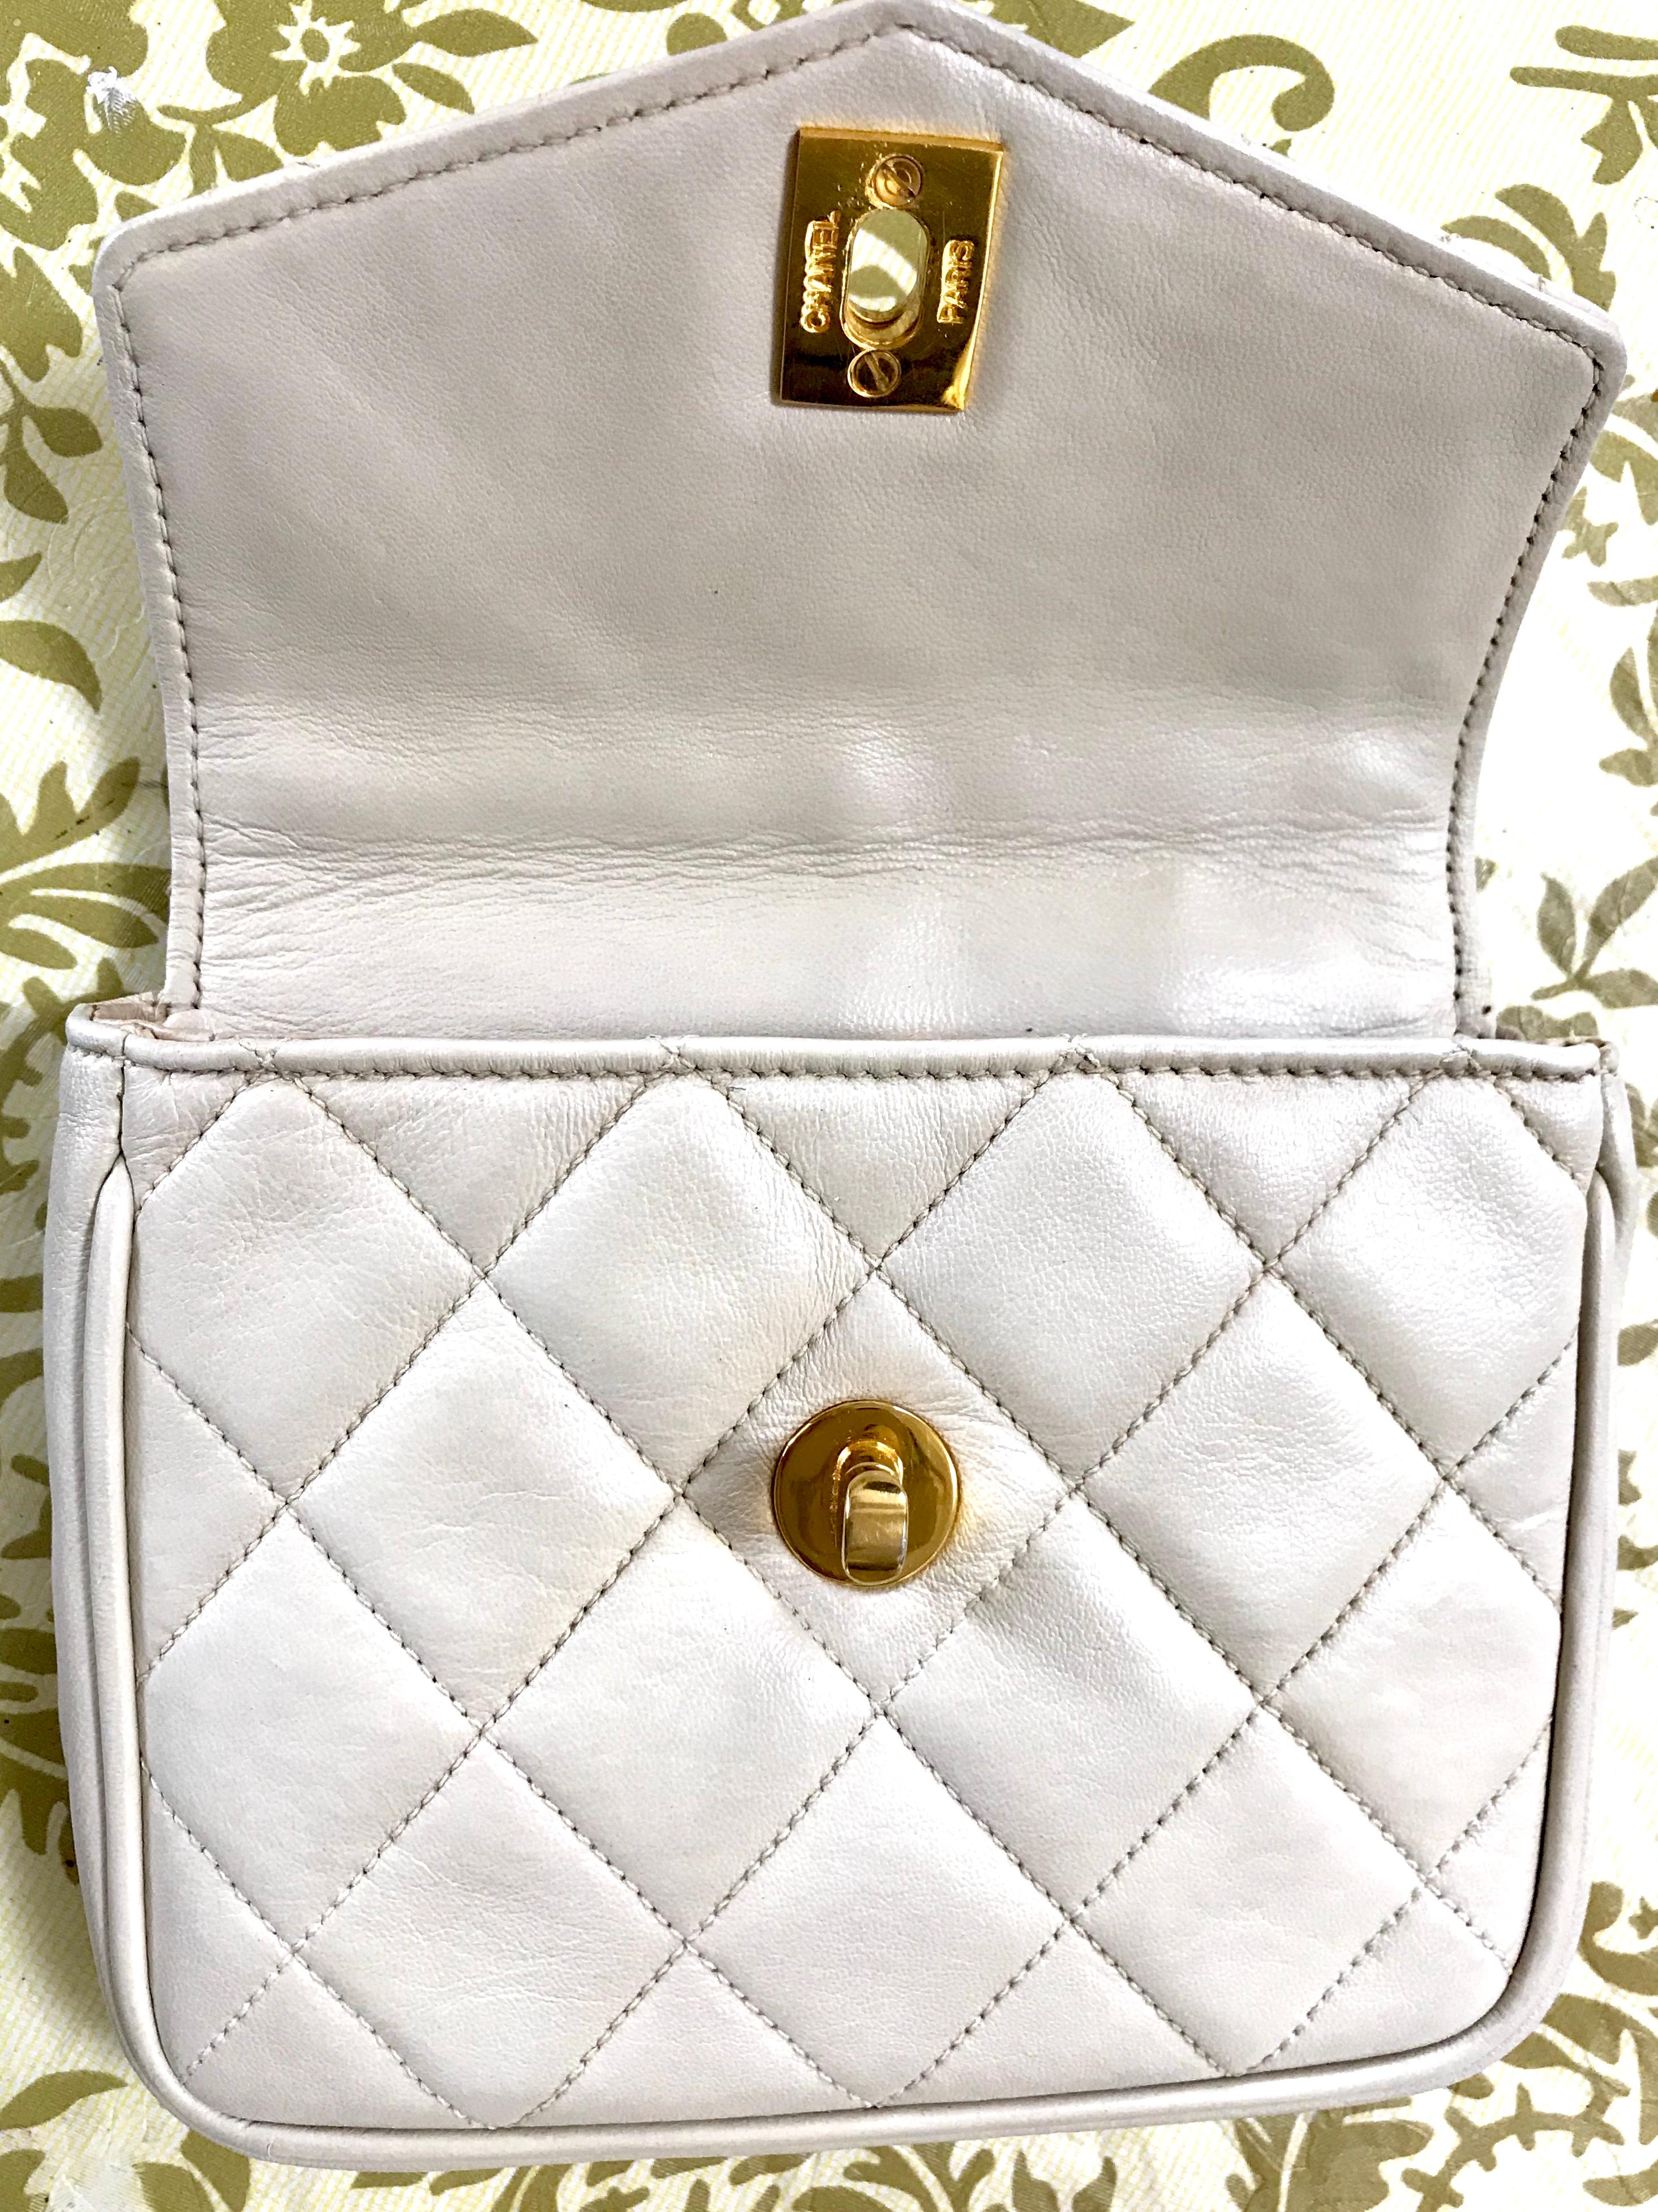 Chanel Vintage ivory / cream lambskin fanny pack hip bag with golden CC closure For Sale 8